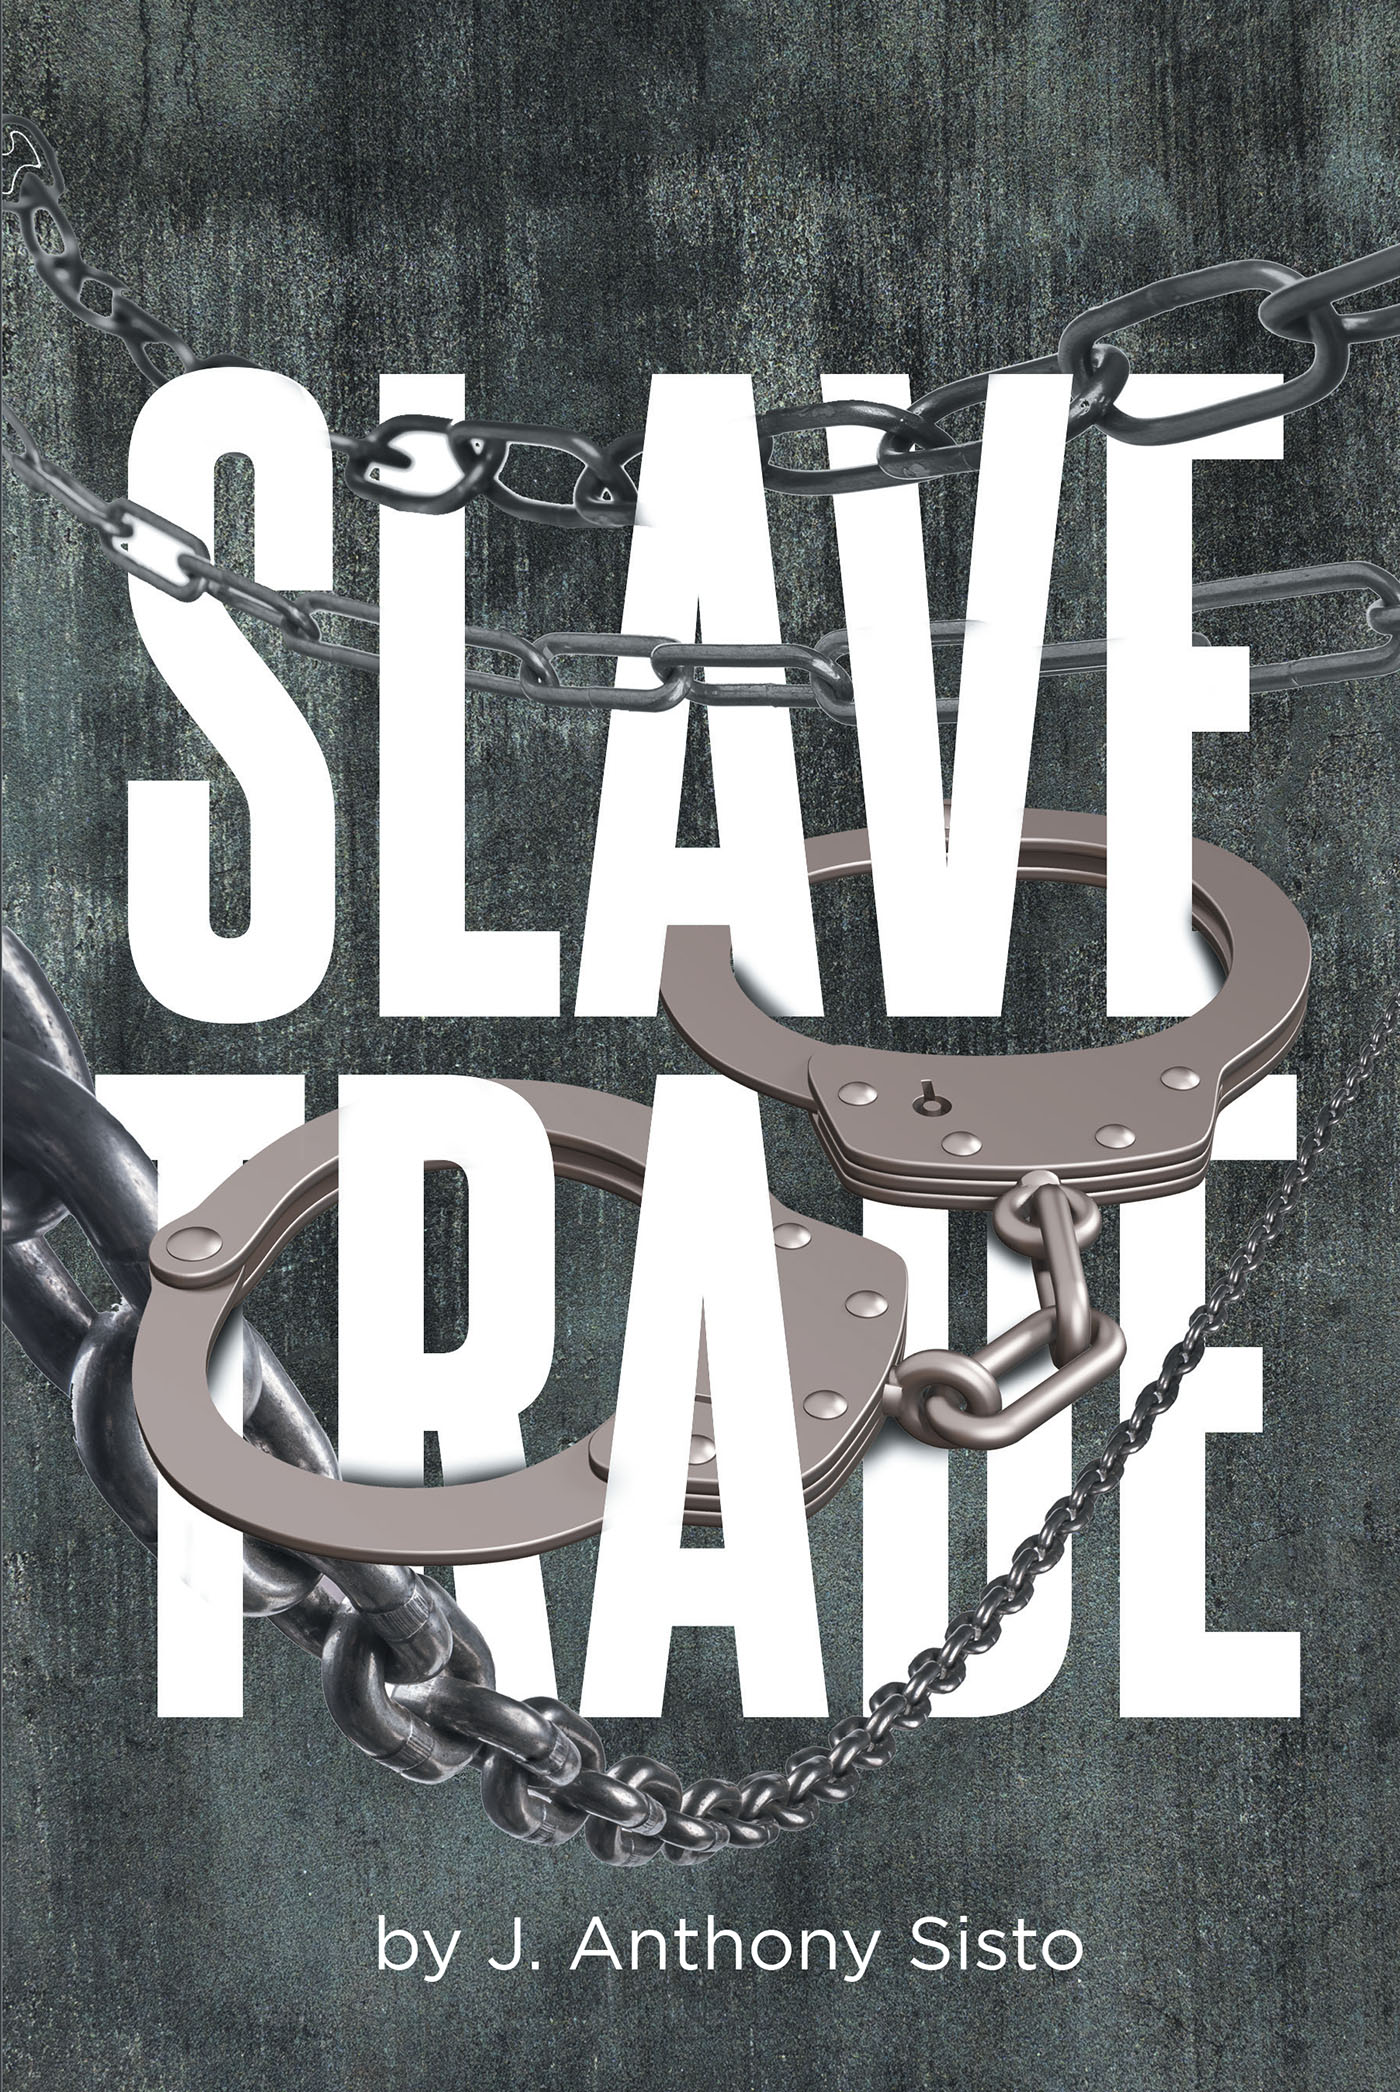 Author J. Anthony Sisto’s New Book, "Slave Trade," is a Fast-Paced Thriller Pitting a Team of Elite Ex-Military Forces Against a Sinister Human Trafficking Organization